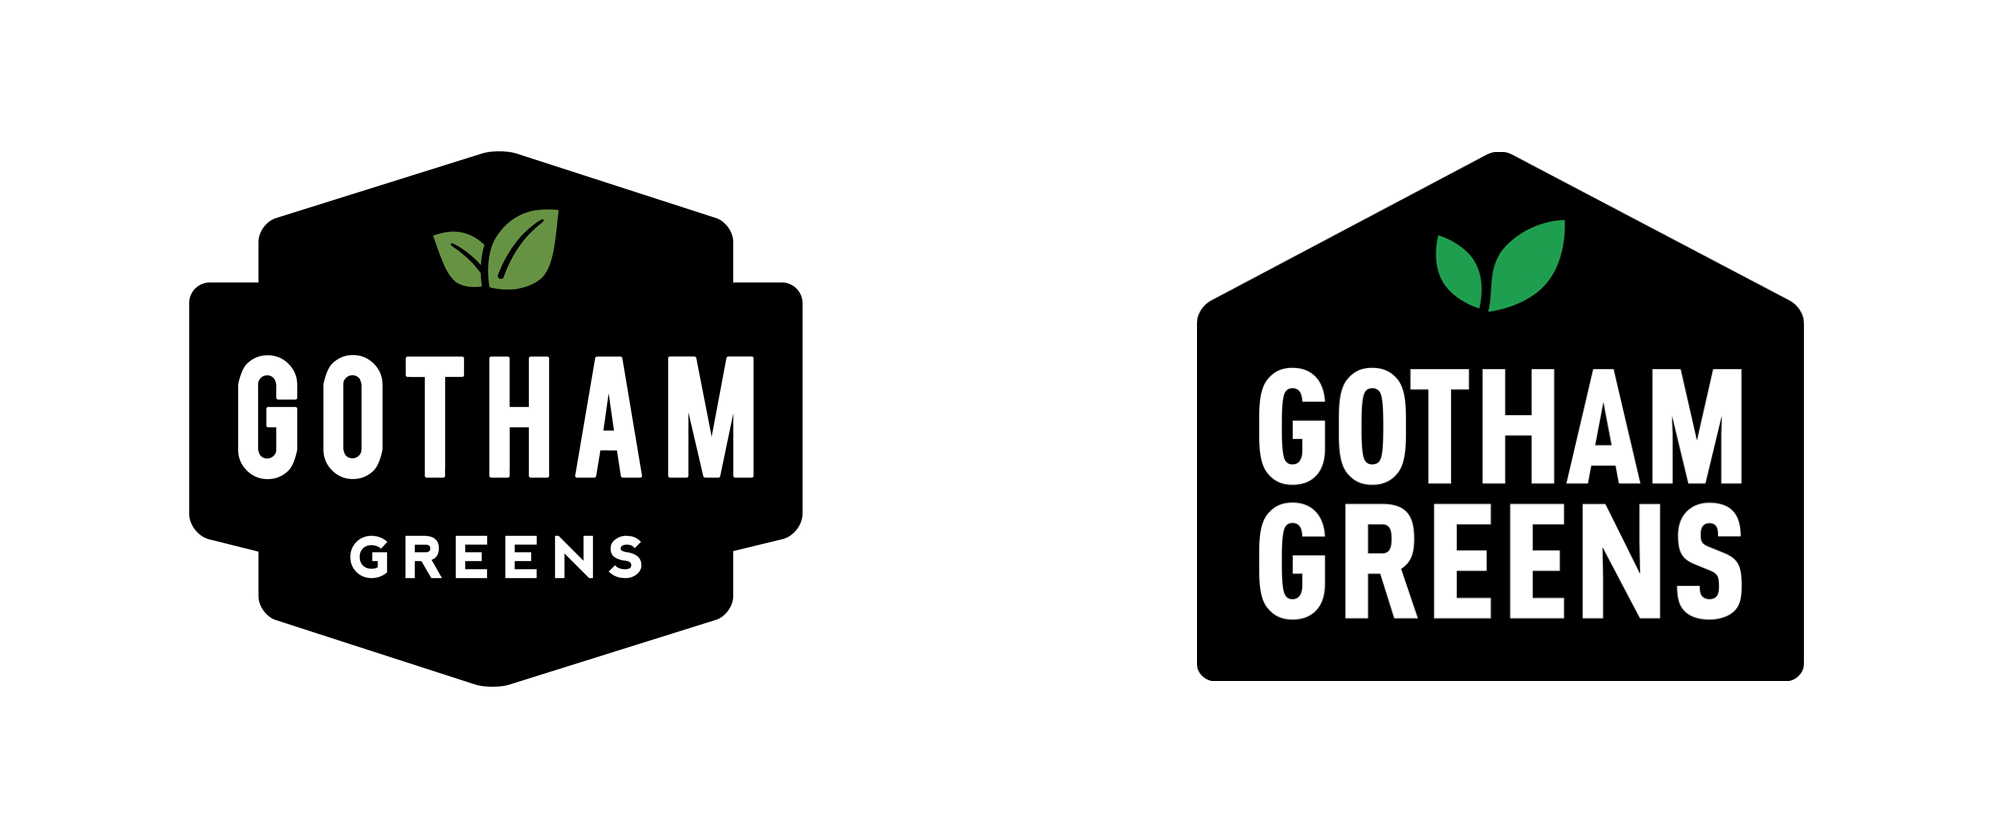 Brand New New Logo And Packaging For Gotham Greens